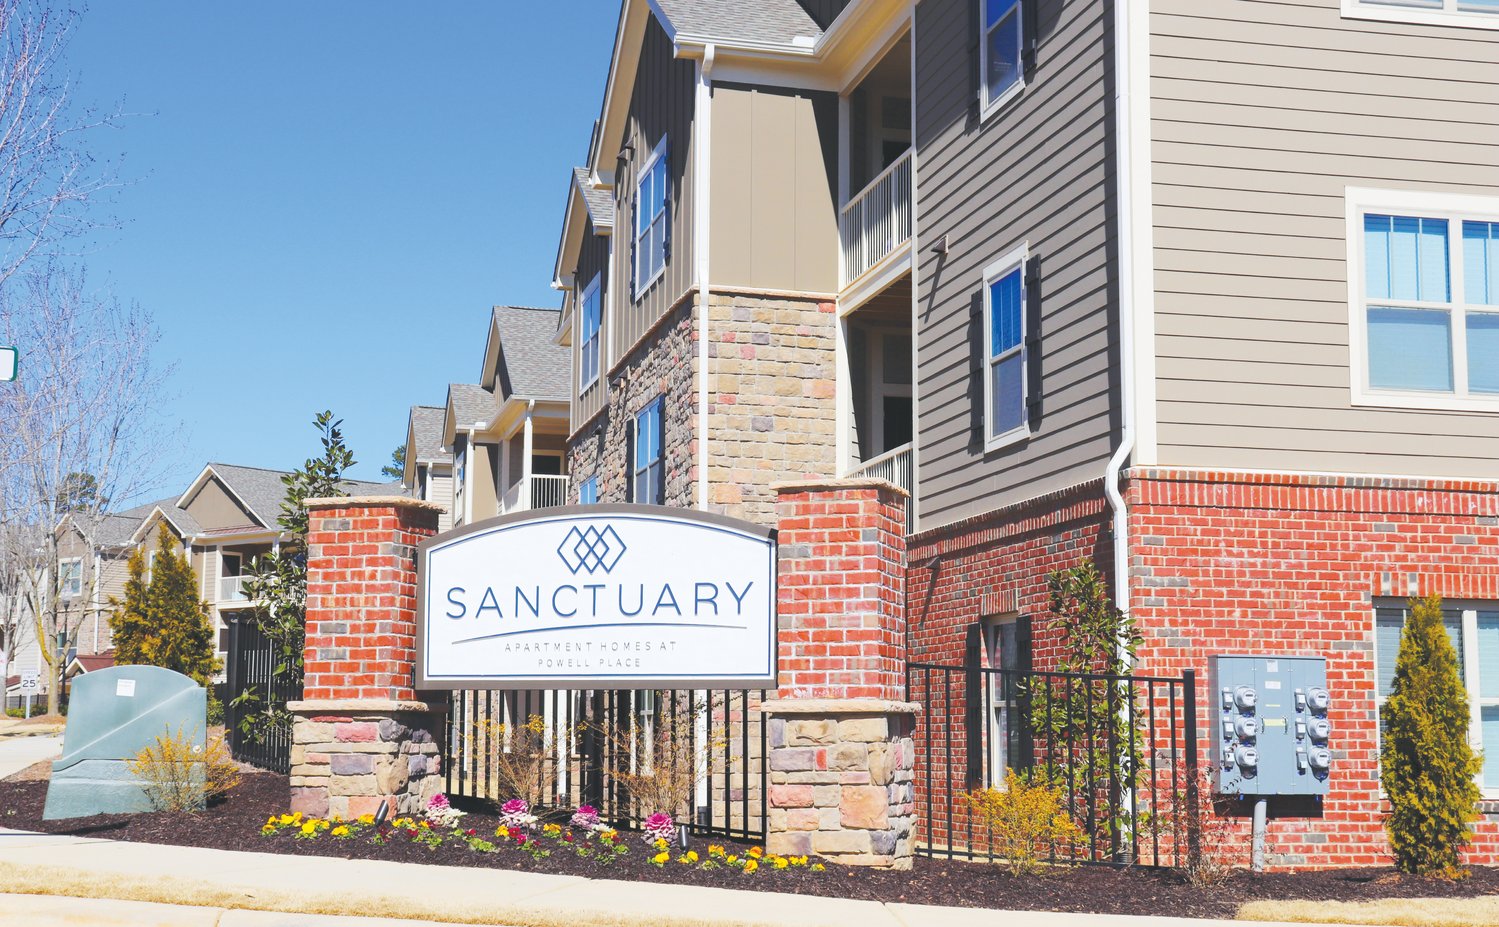 The apartments at Sanctuary at Powell Place in Pittsboro.